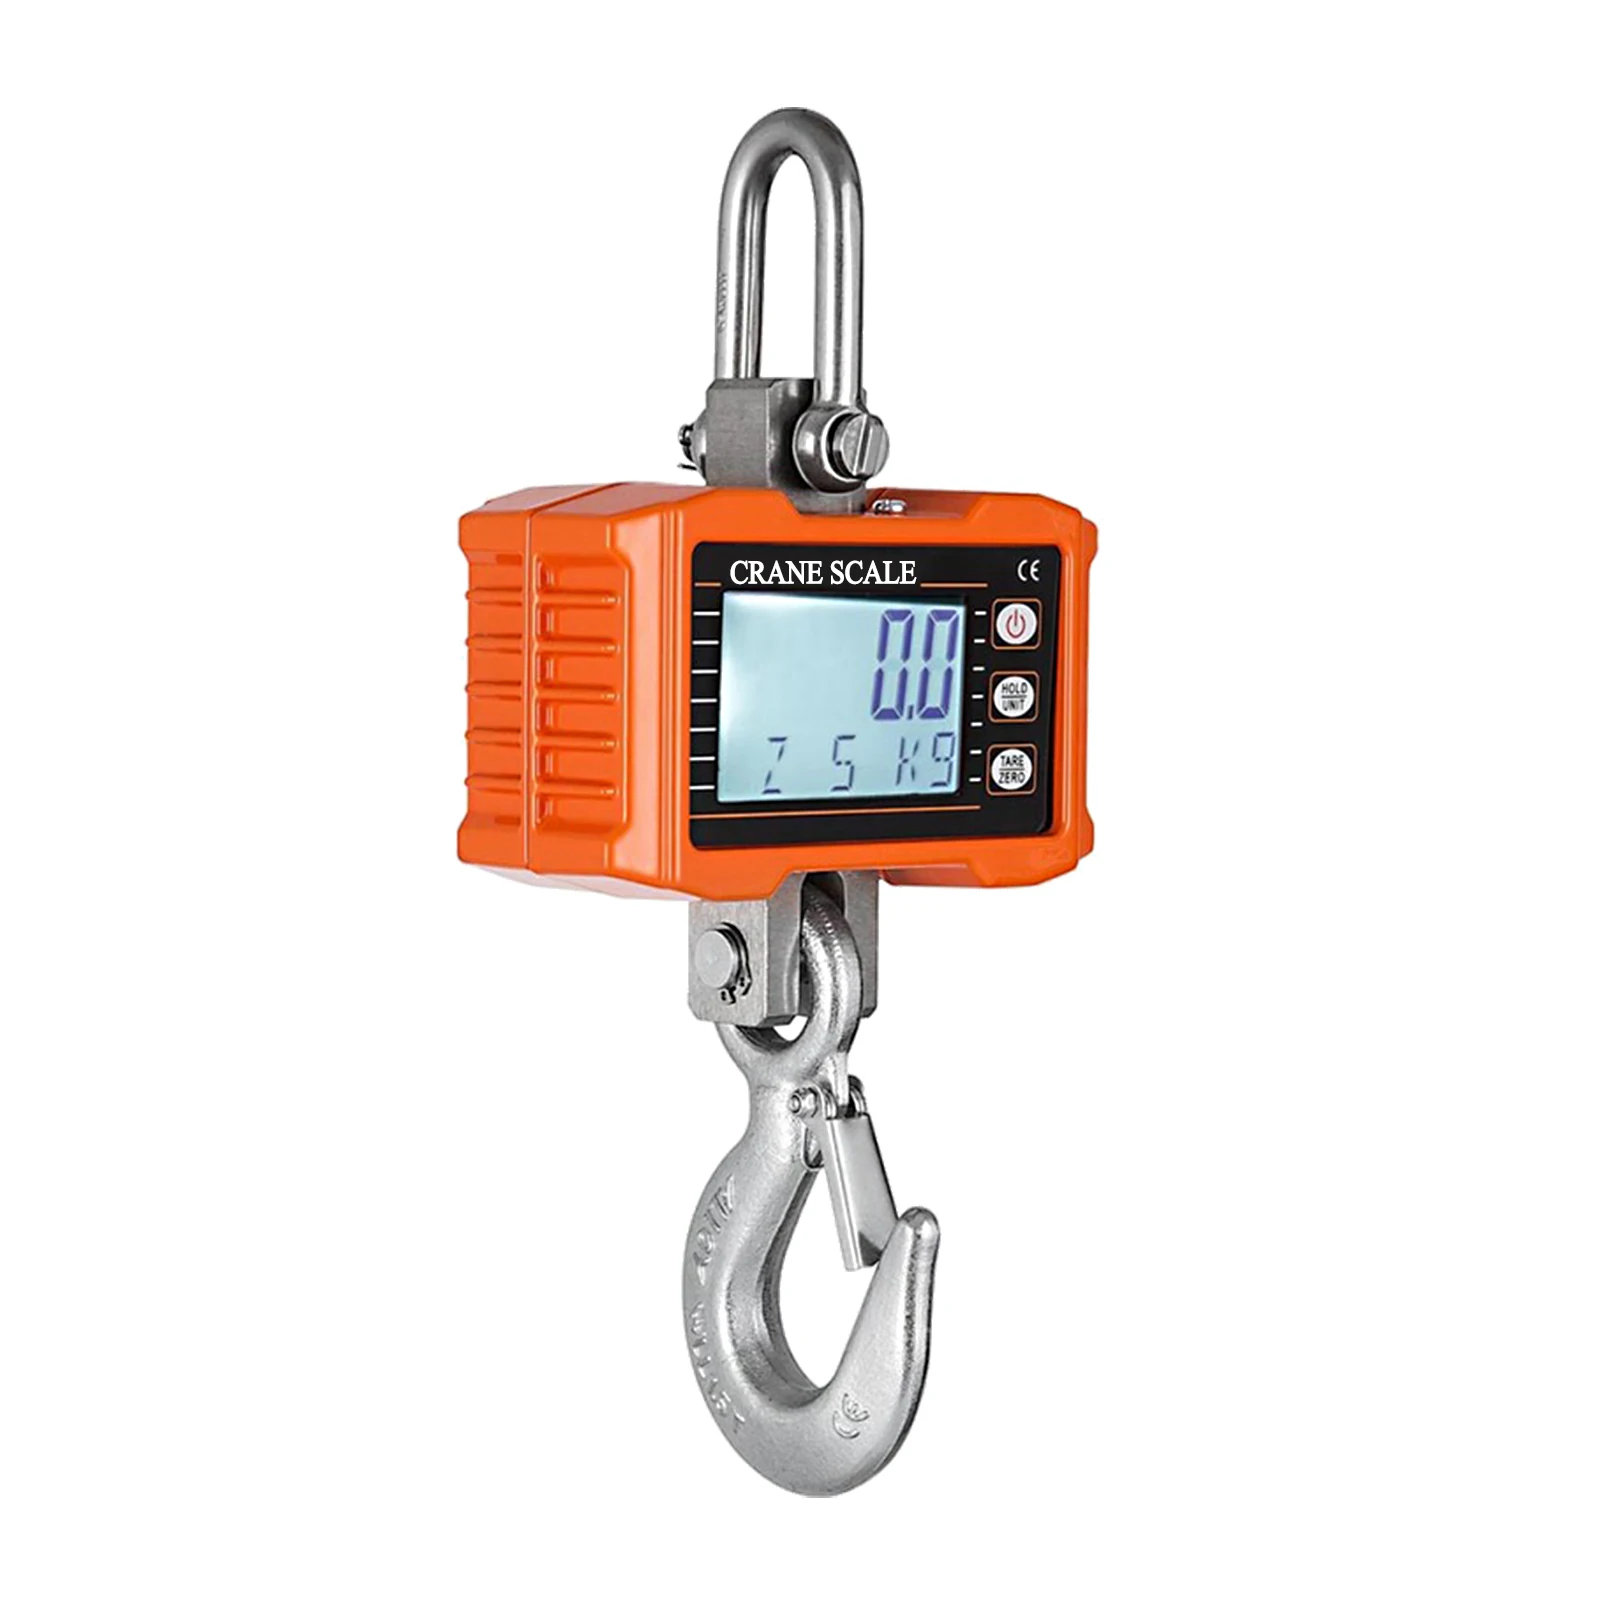 Portable Digital Hanging Scale 1000kg/2204lbs Heavy Duty Crane Scale LCD Backlight Industrial Hook Scales For Household